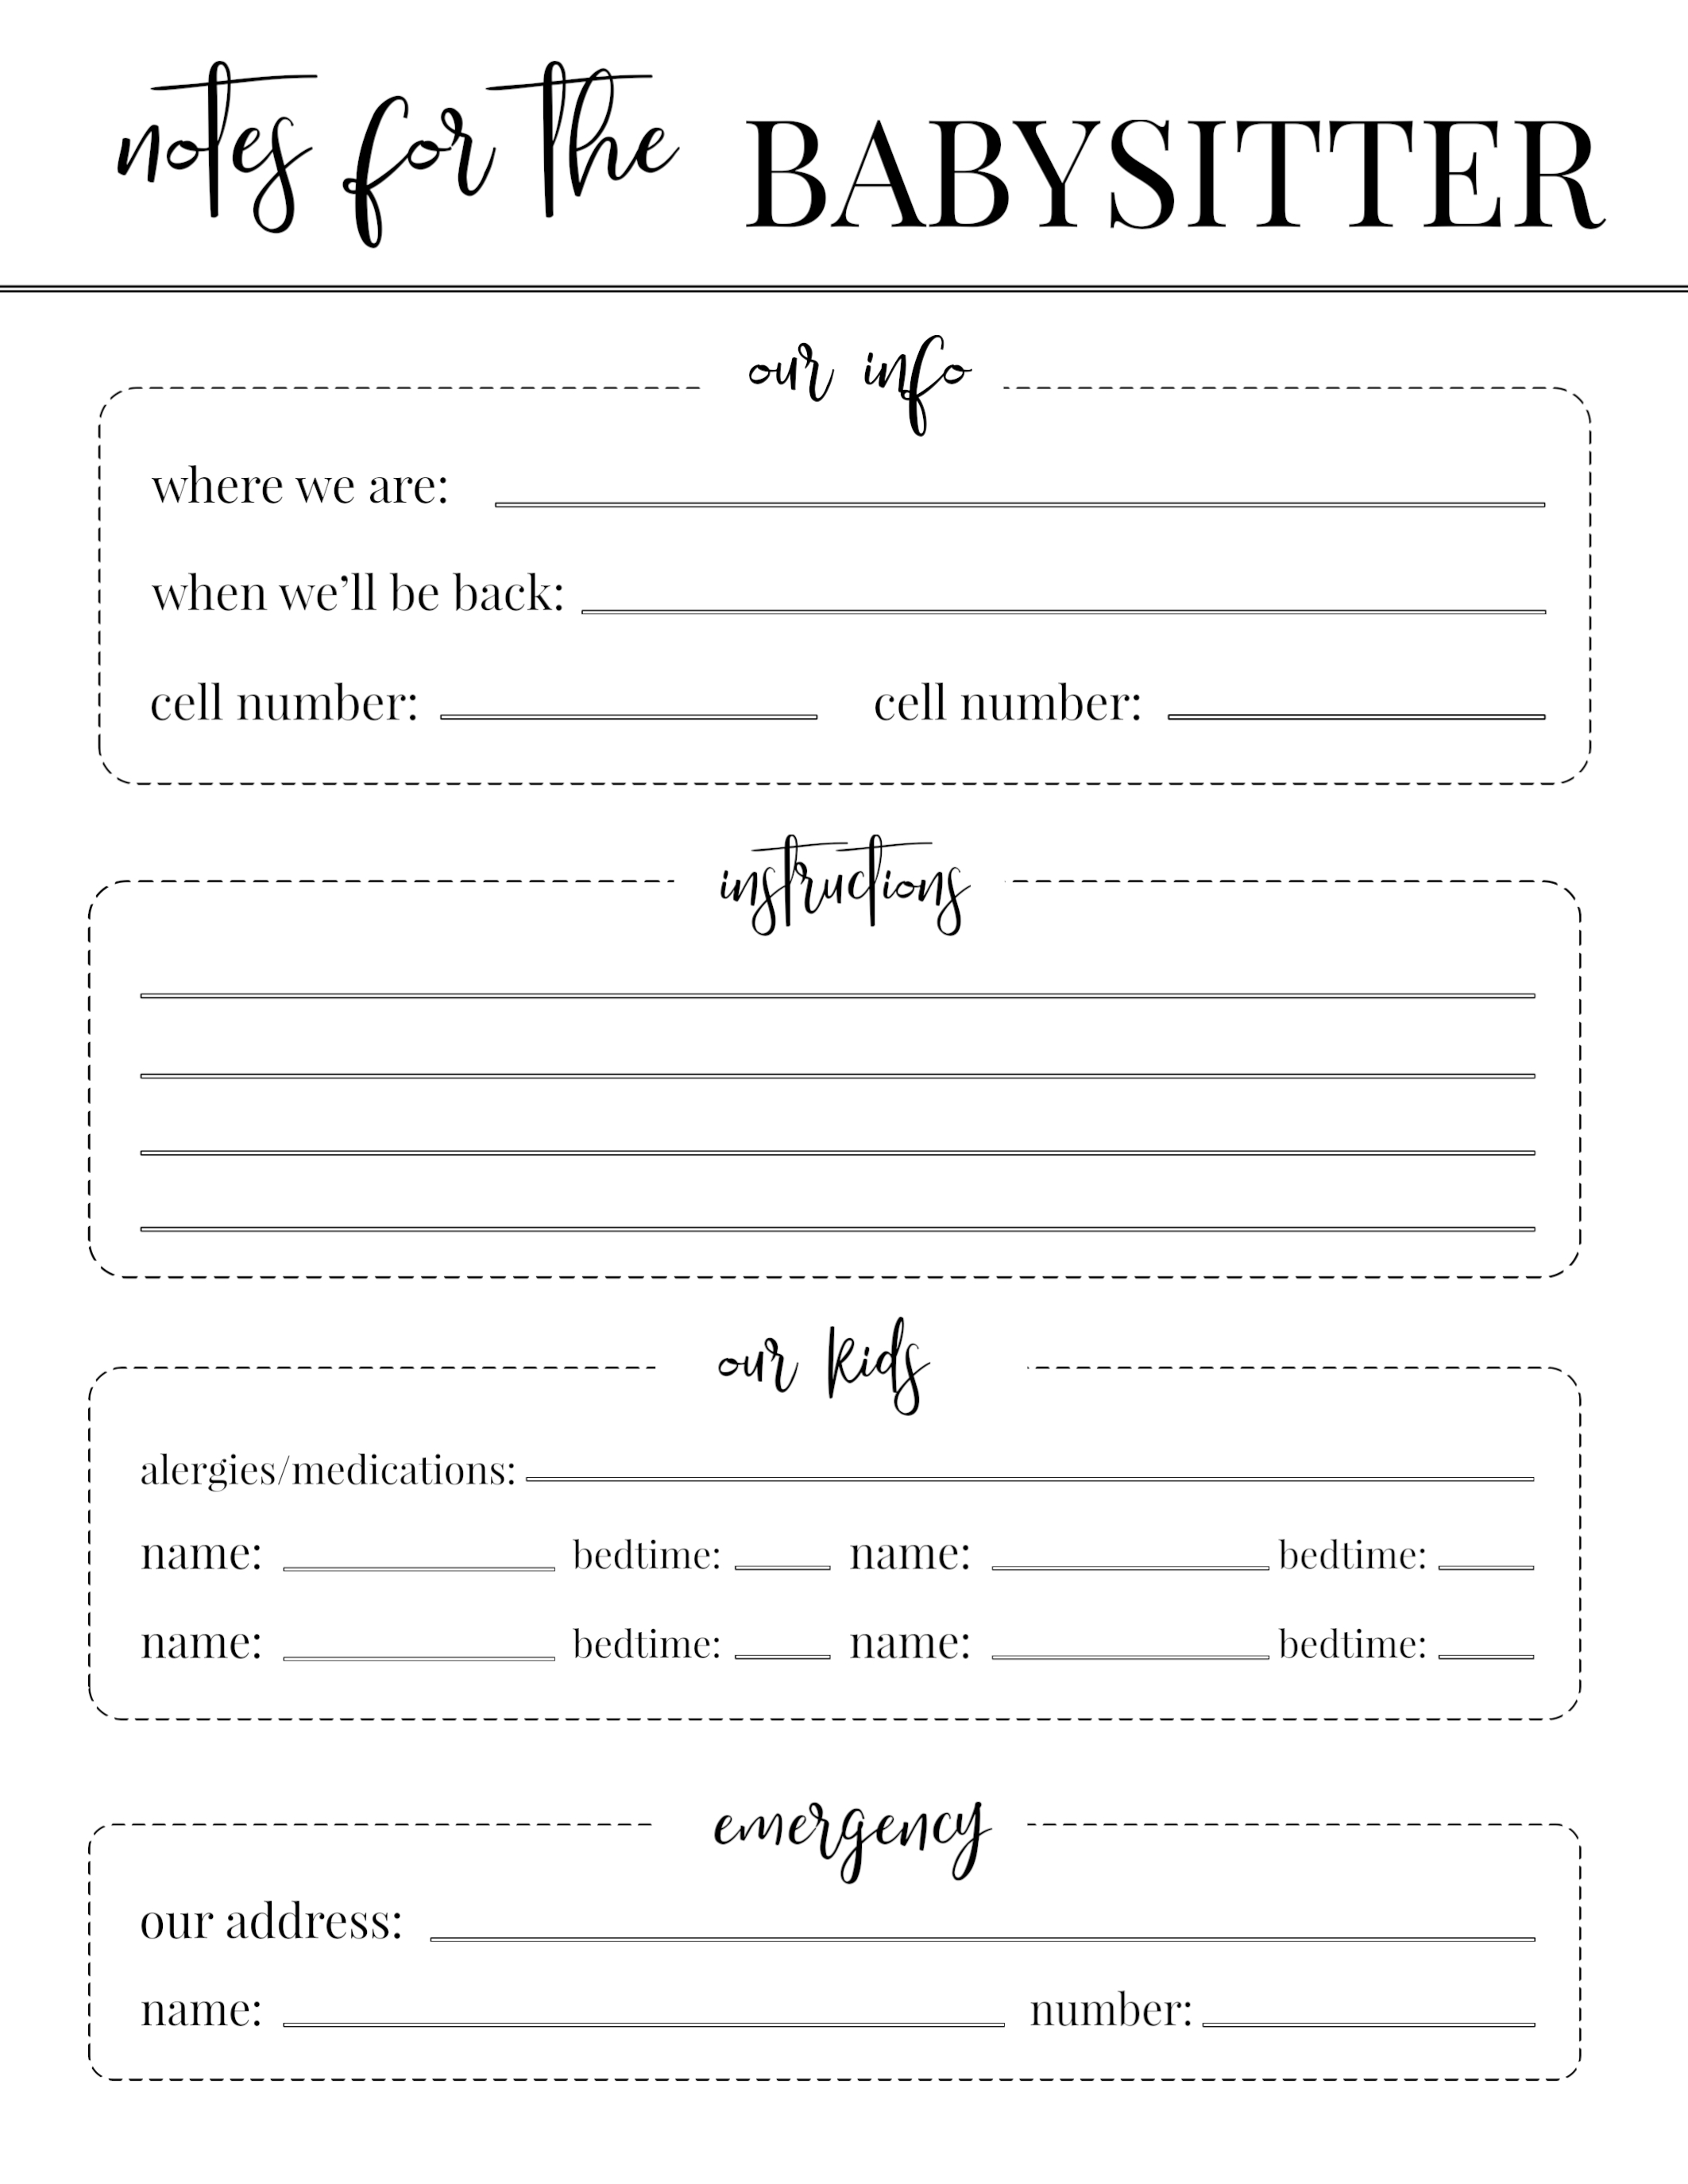 Free Printable Babysitter Notes Template - Paper Trail Design With Nanny Notes Template